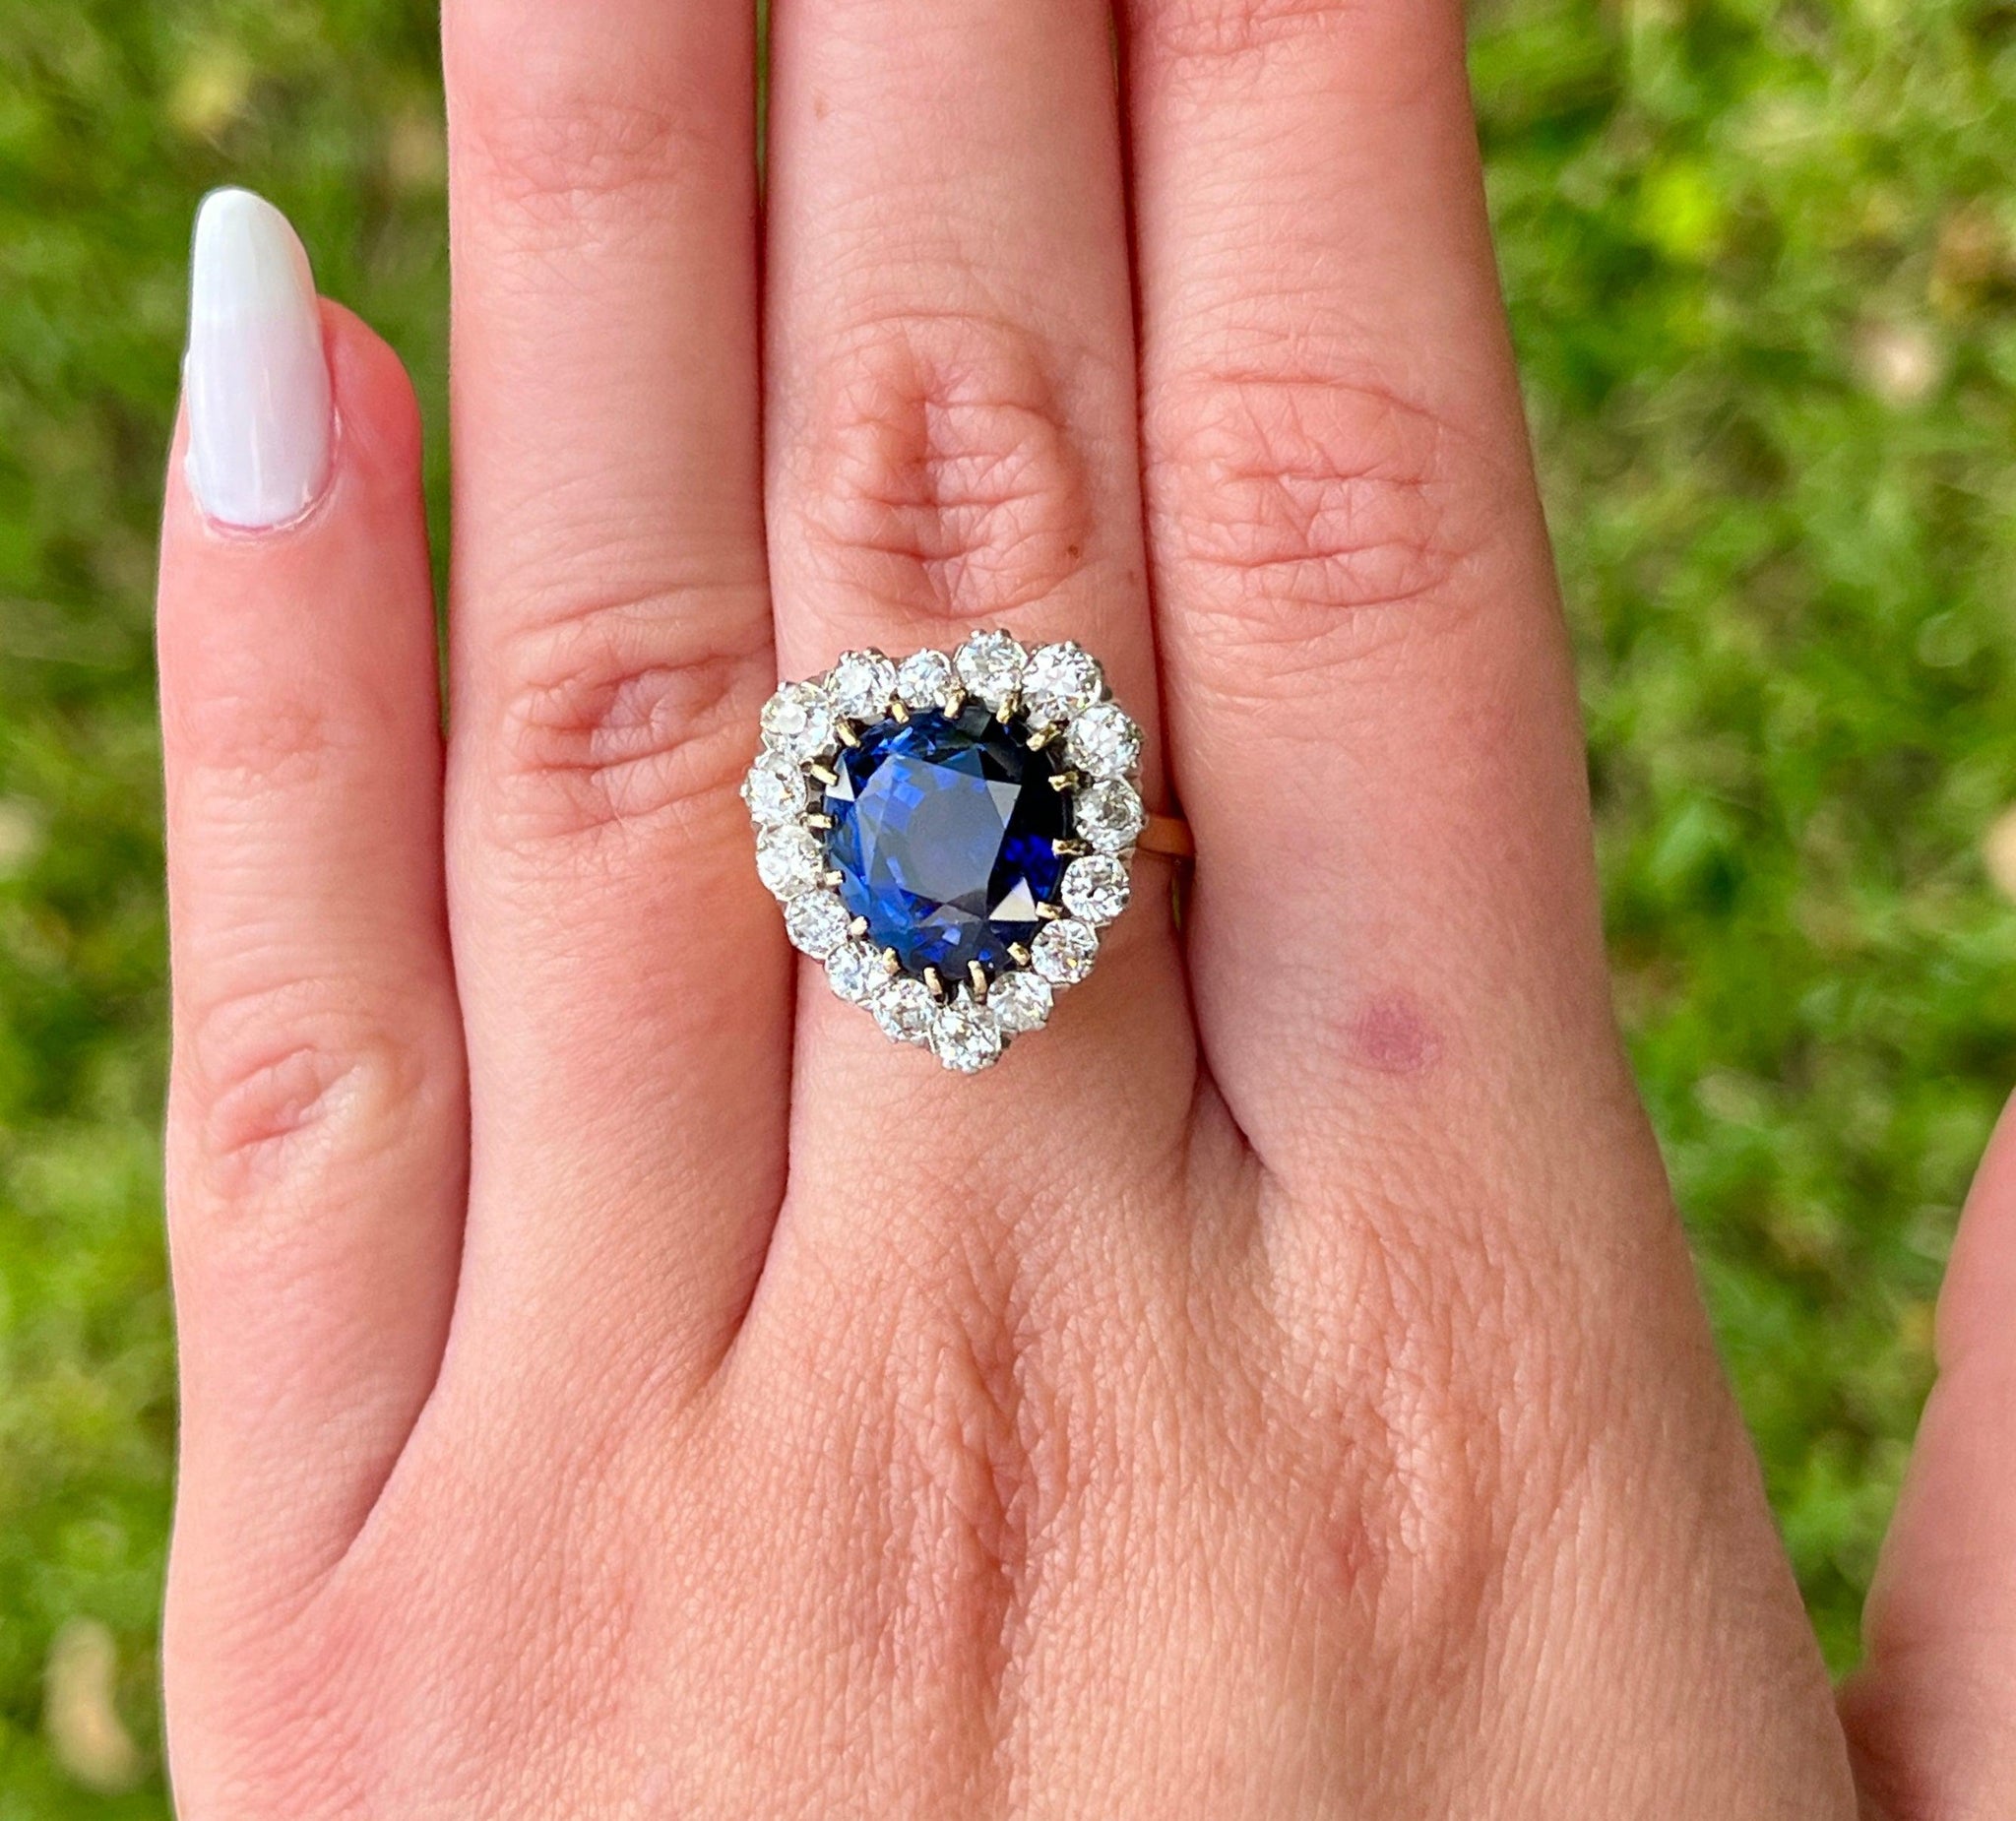 Blue sapphire engagement ring, gold leaf ring with diamonds / Silvestra |  Eden Garden Jewelry™